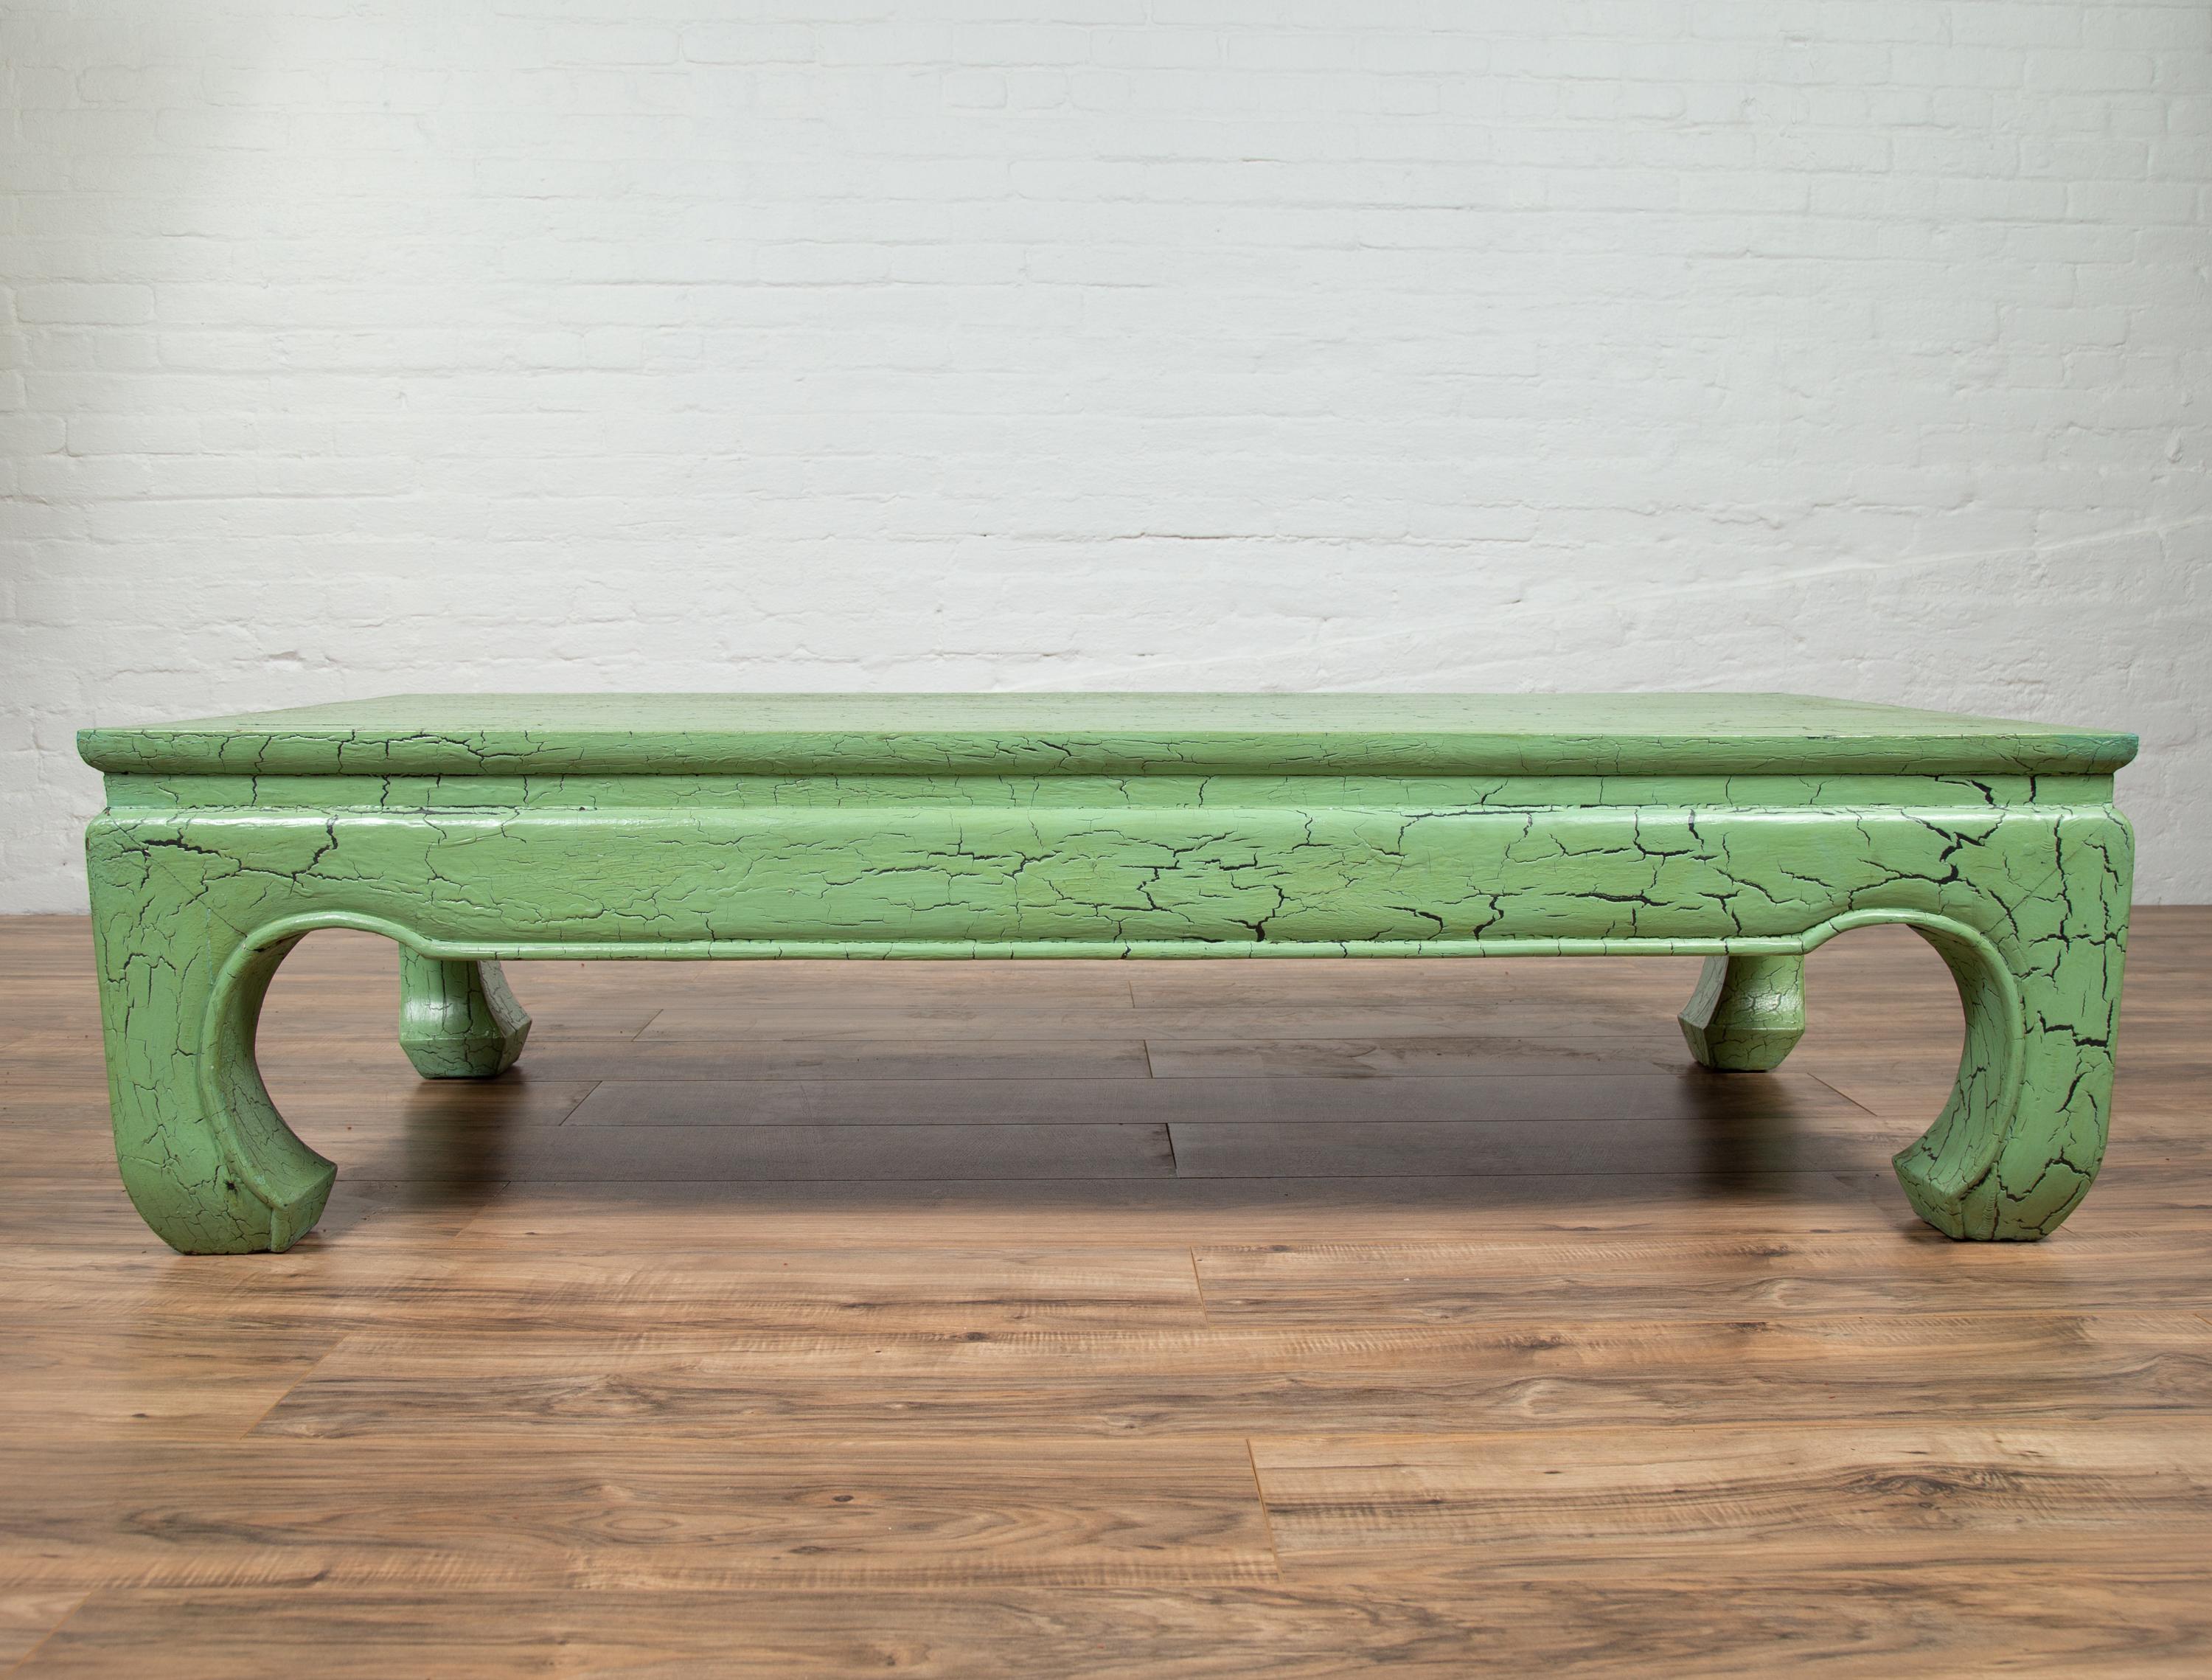 A vintage Thai teak wood long coffee table from the mid-20th century, with distressed green crackled design and chow legs. Born in Thailand during the mid-century period, this stylish teak wood coffee table features an eye-catching green crackled